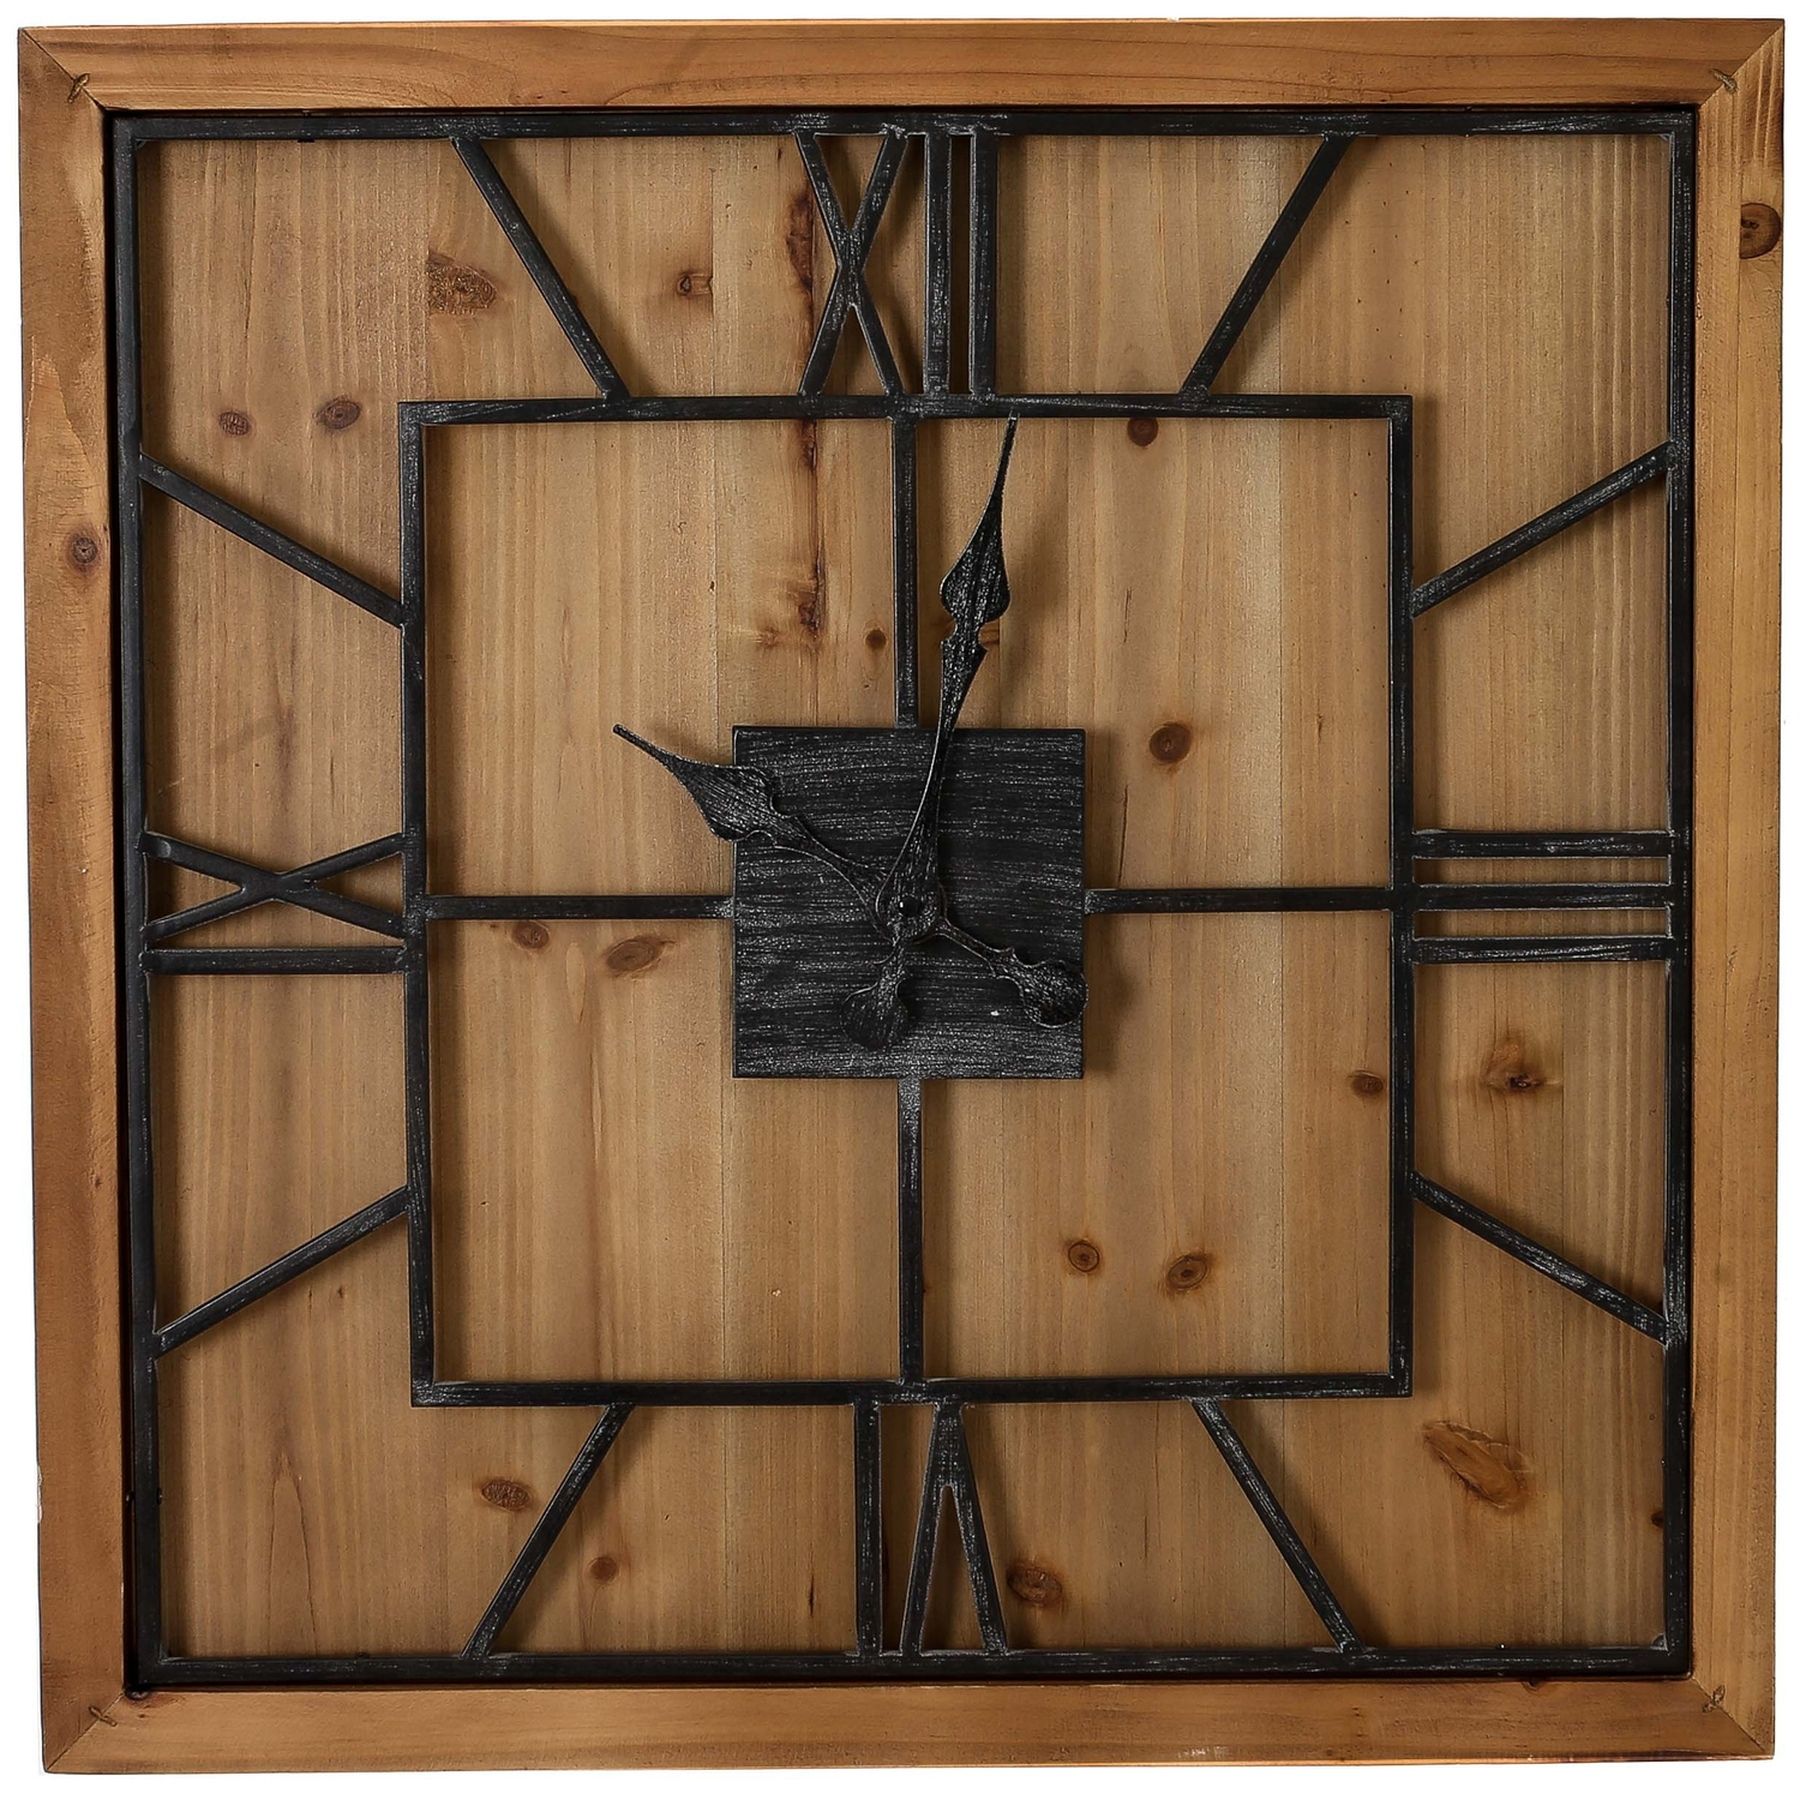 Williston Square Large Wooden Wall Clock - Image 1